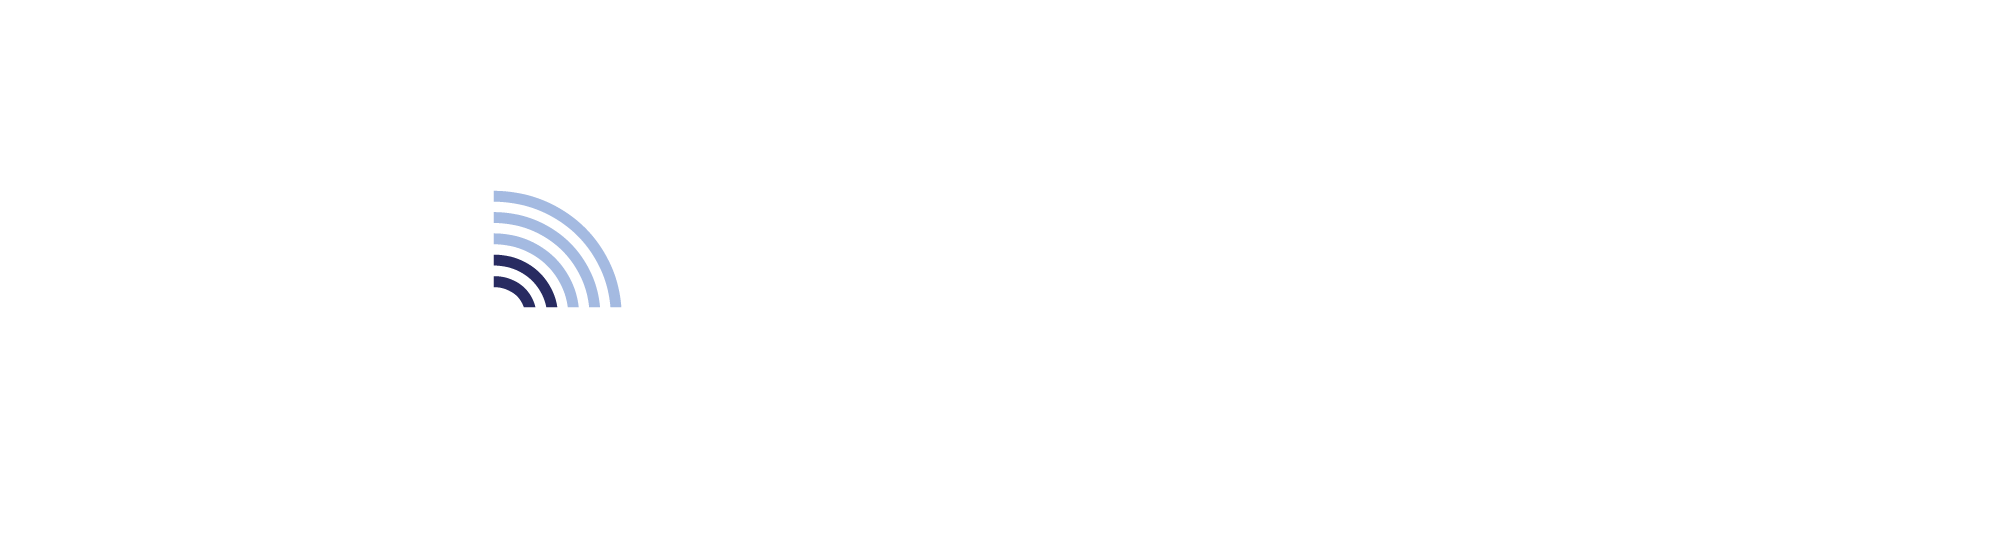 SMART MANUFACTURING EXPO